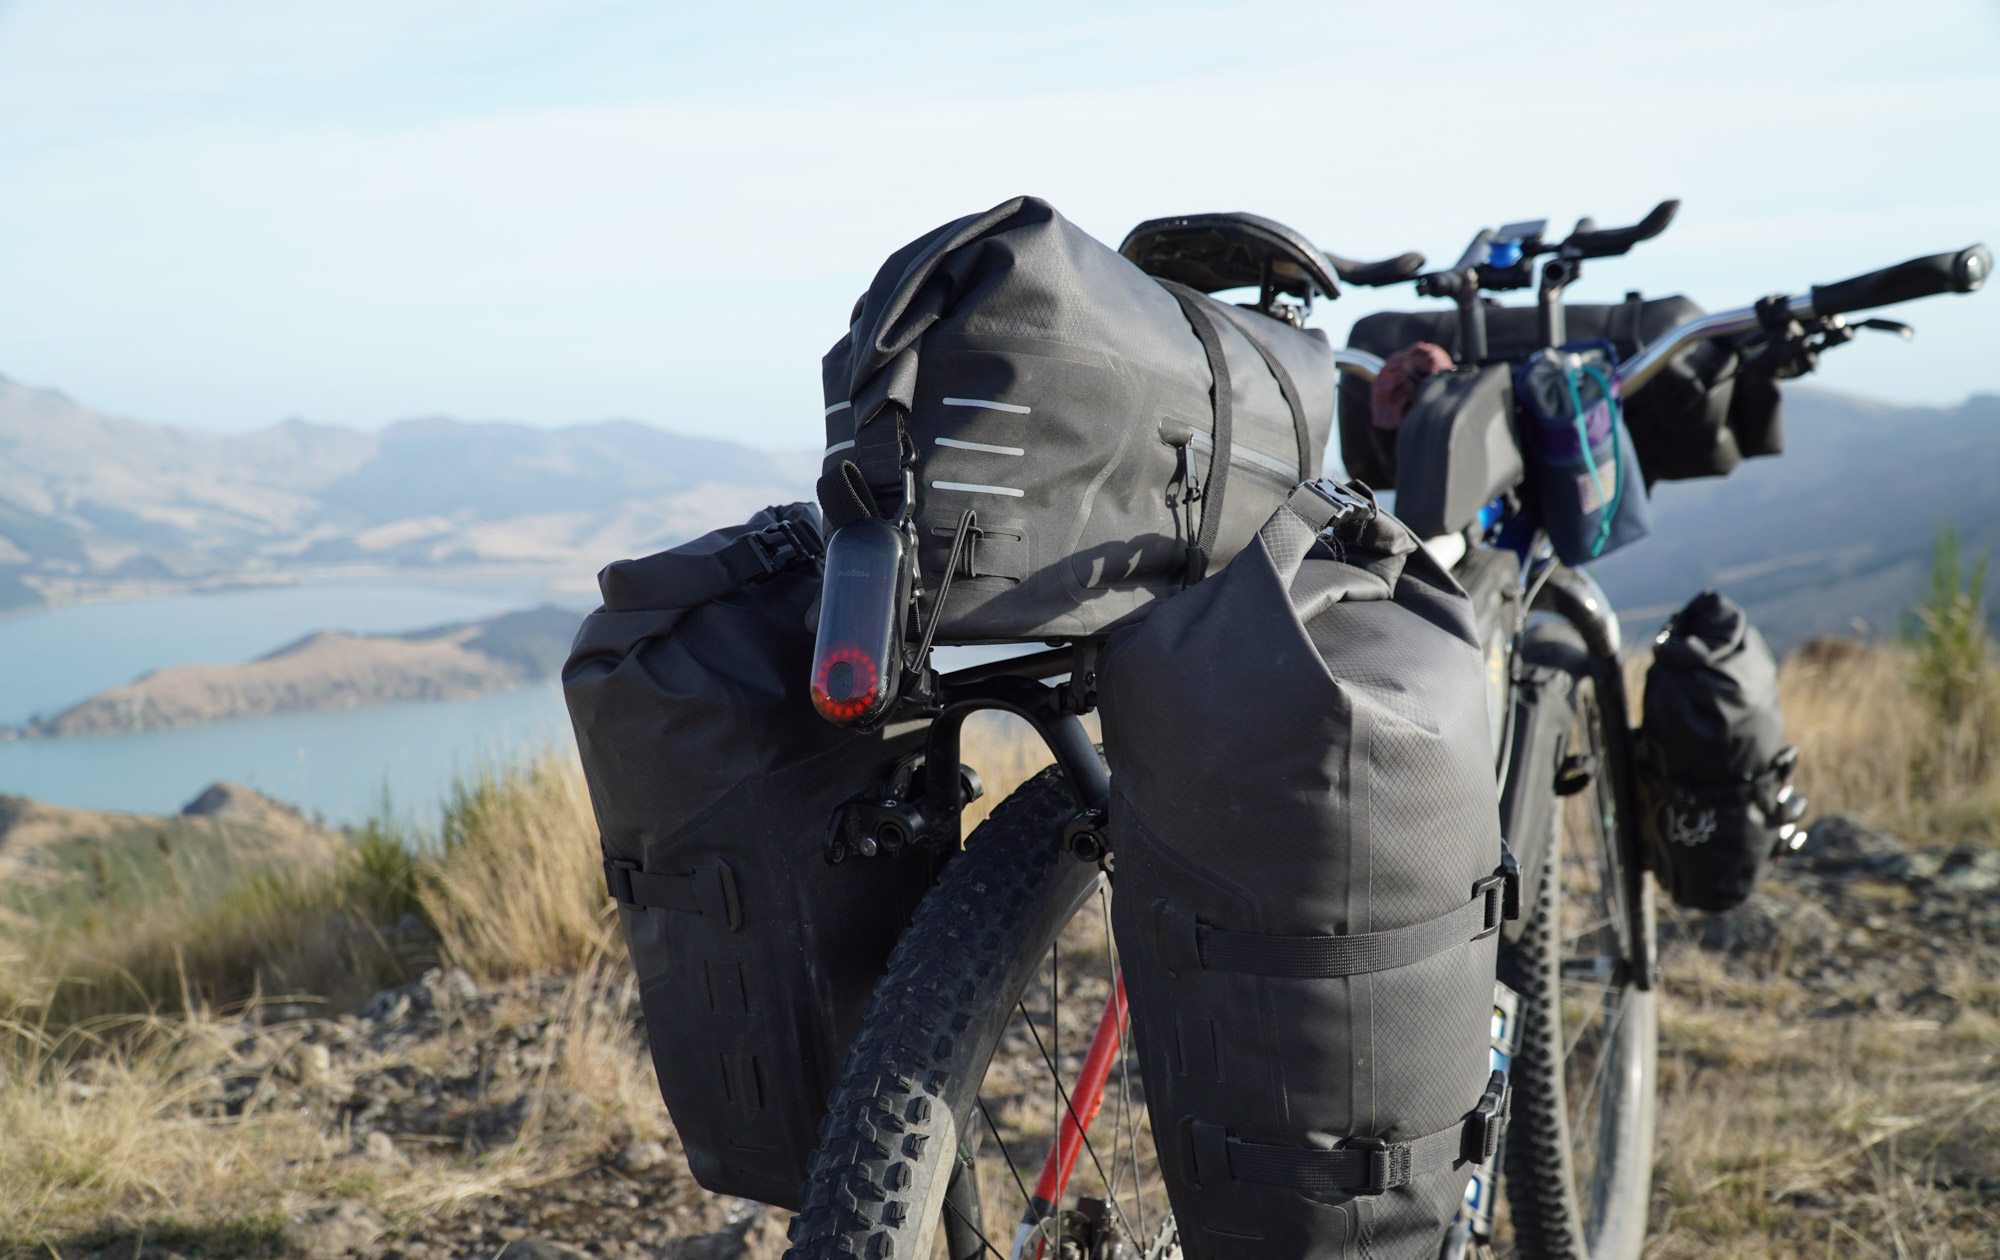 A look at the back end, with three black drybag style bags on the sturdy Tailfin rear rack: two pannier bags and a seat bag. A rear radar/blinkie light sits at the very back.